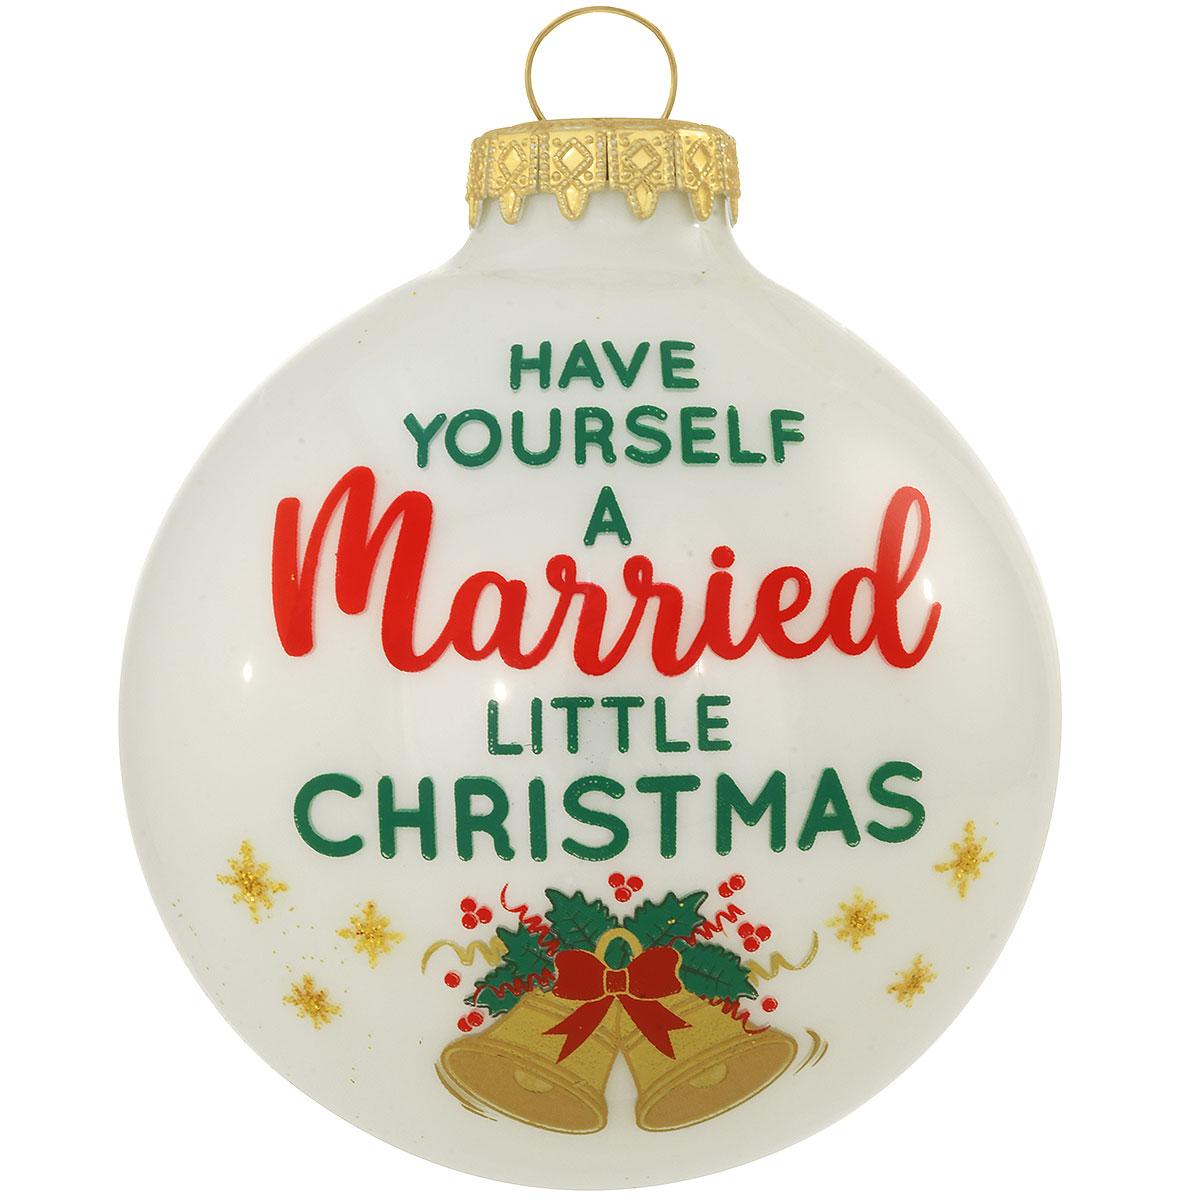 A Married Little Christmas